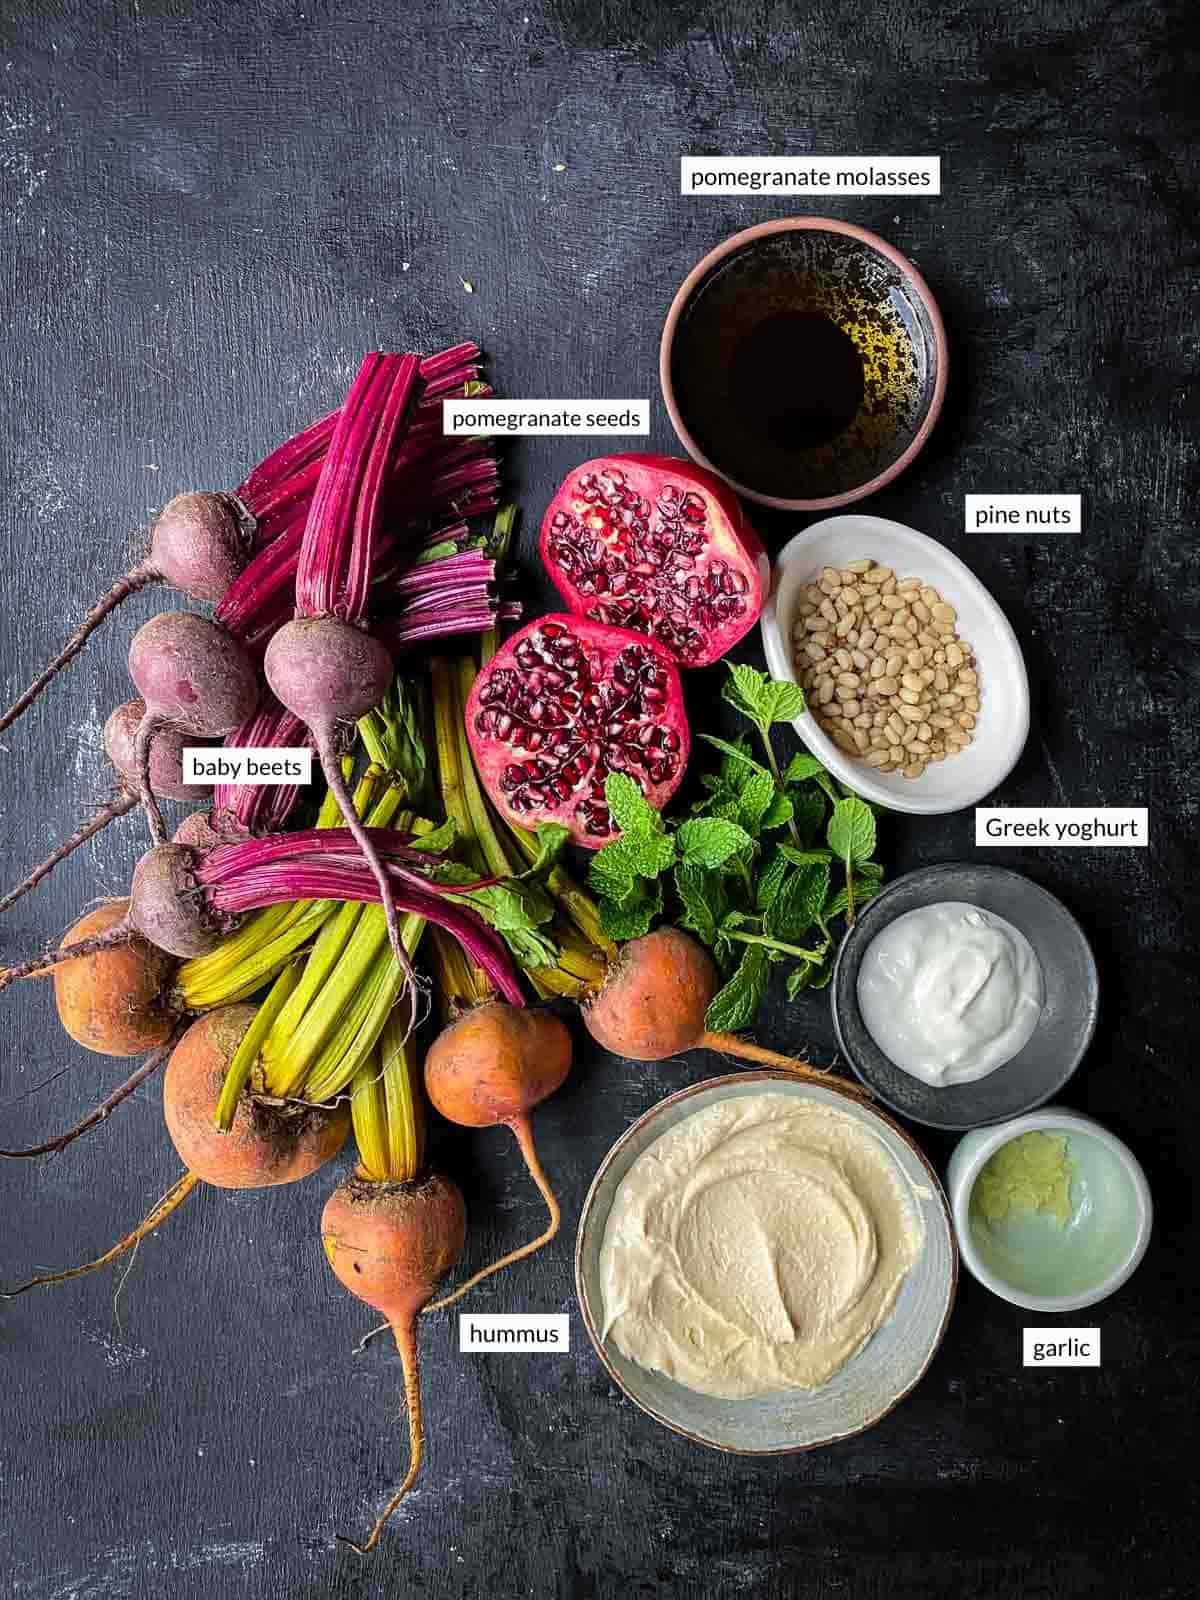 labelled ingredients photo showing baby beets, next to pomegranate, pomegranate molasses, pine nut, yoghurt, garlic and hummus.